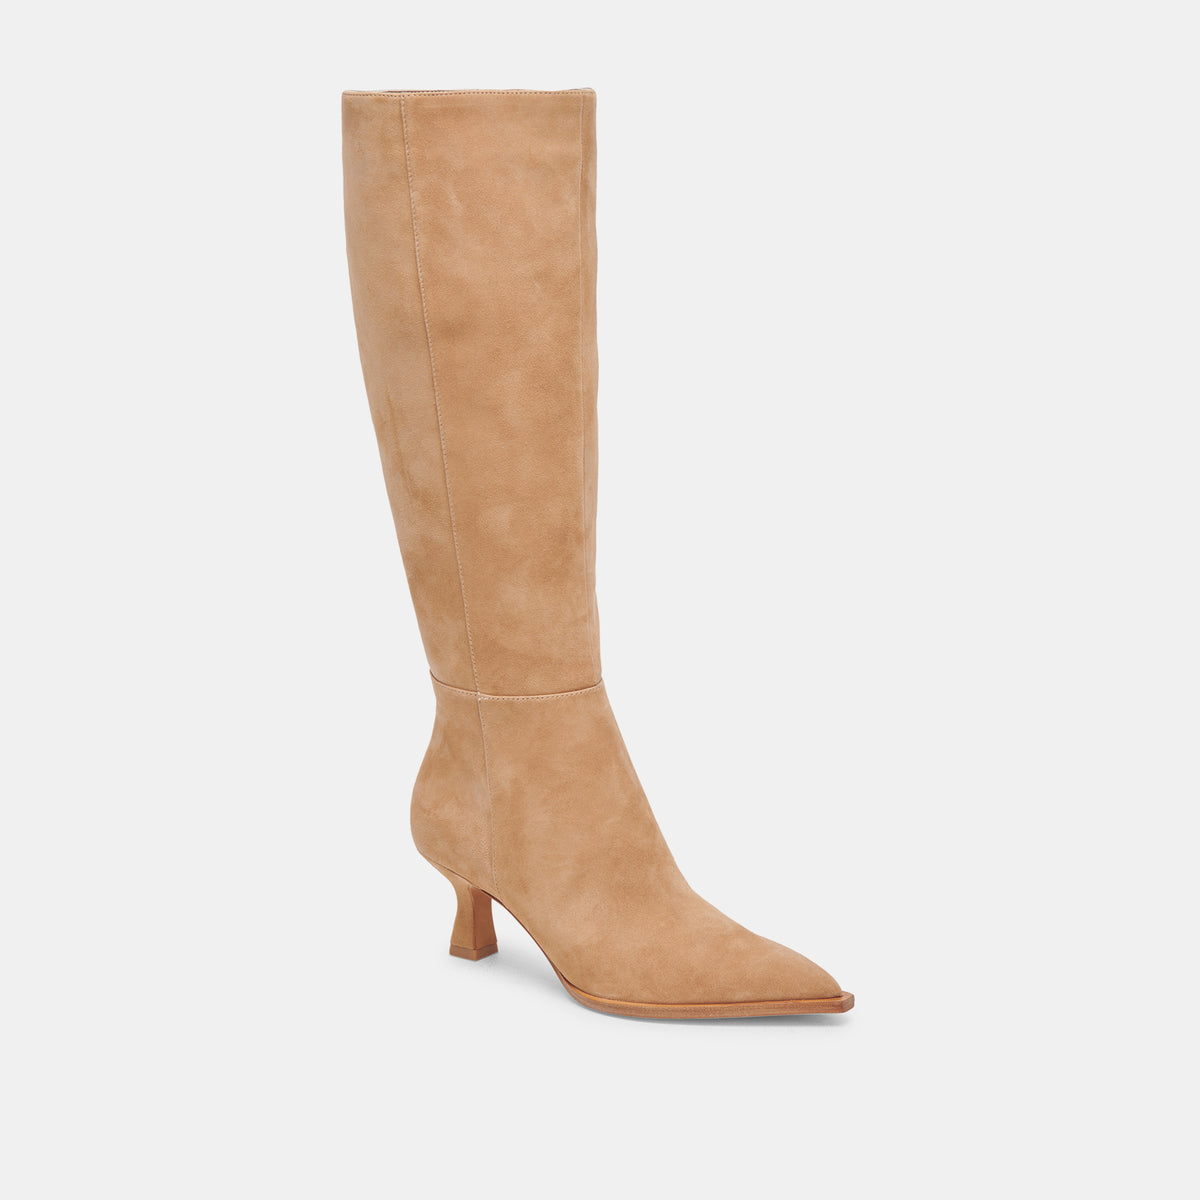 AUGGIE Boots Camel Suede | Women's Camel Suede Knee-High Boots – Dolce Vita